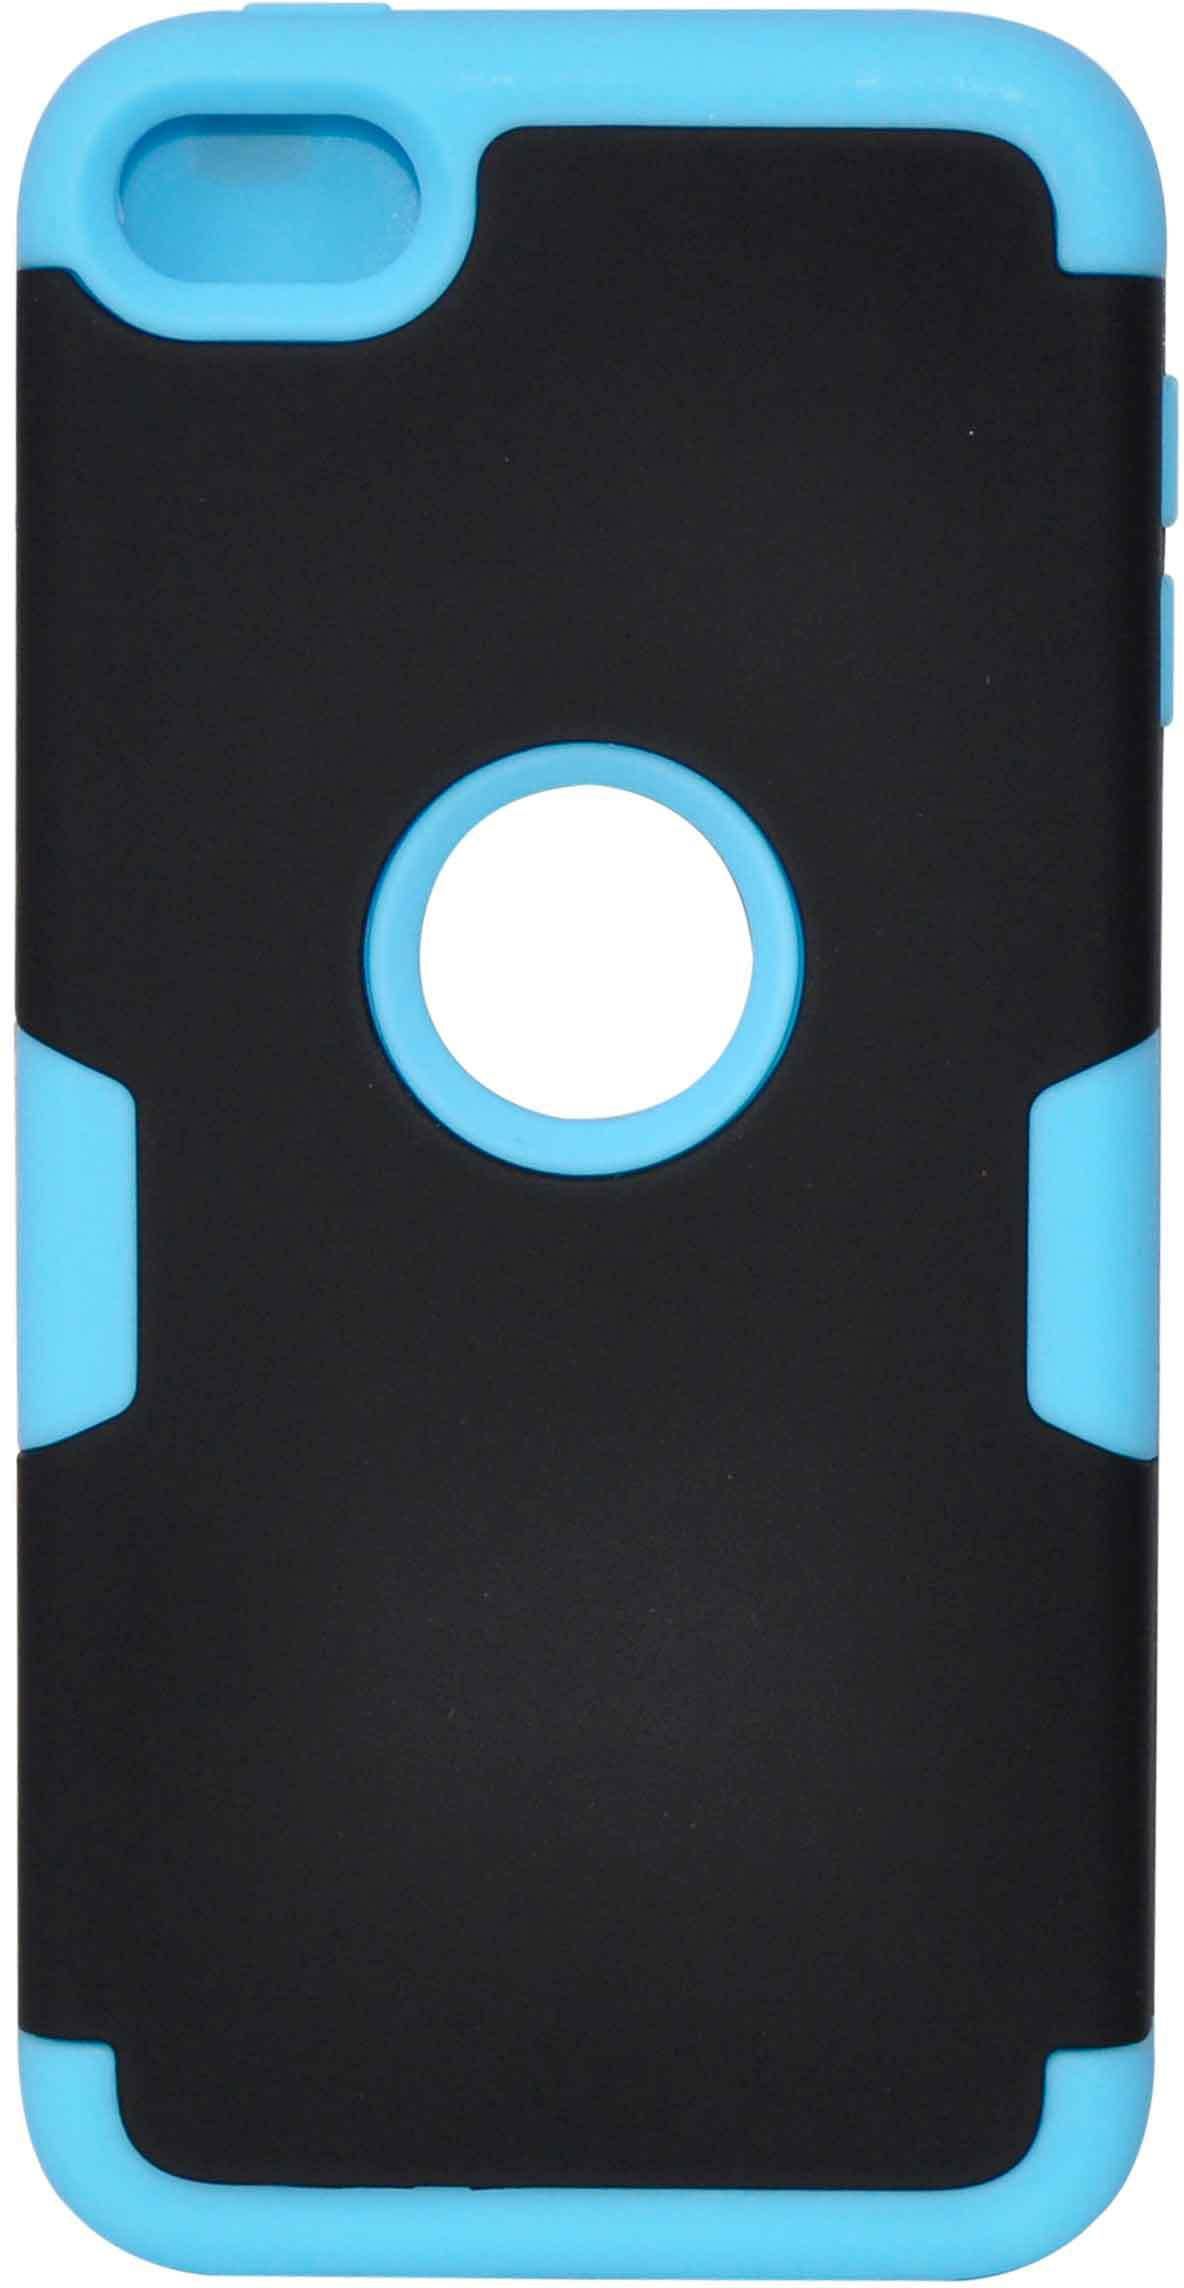 Coverking For iPod Touch 5 Heavy Duty Defender Hybrid Rugged Silicone Hard Case Cover Blue Black